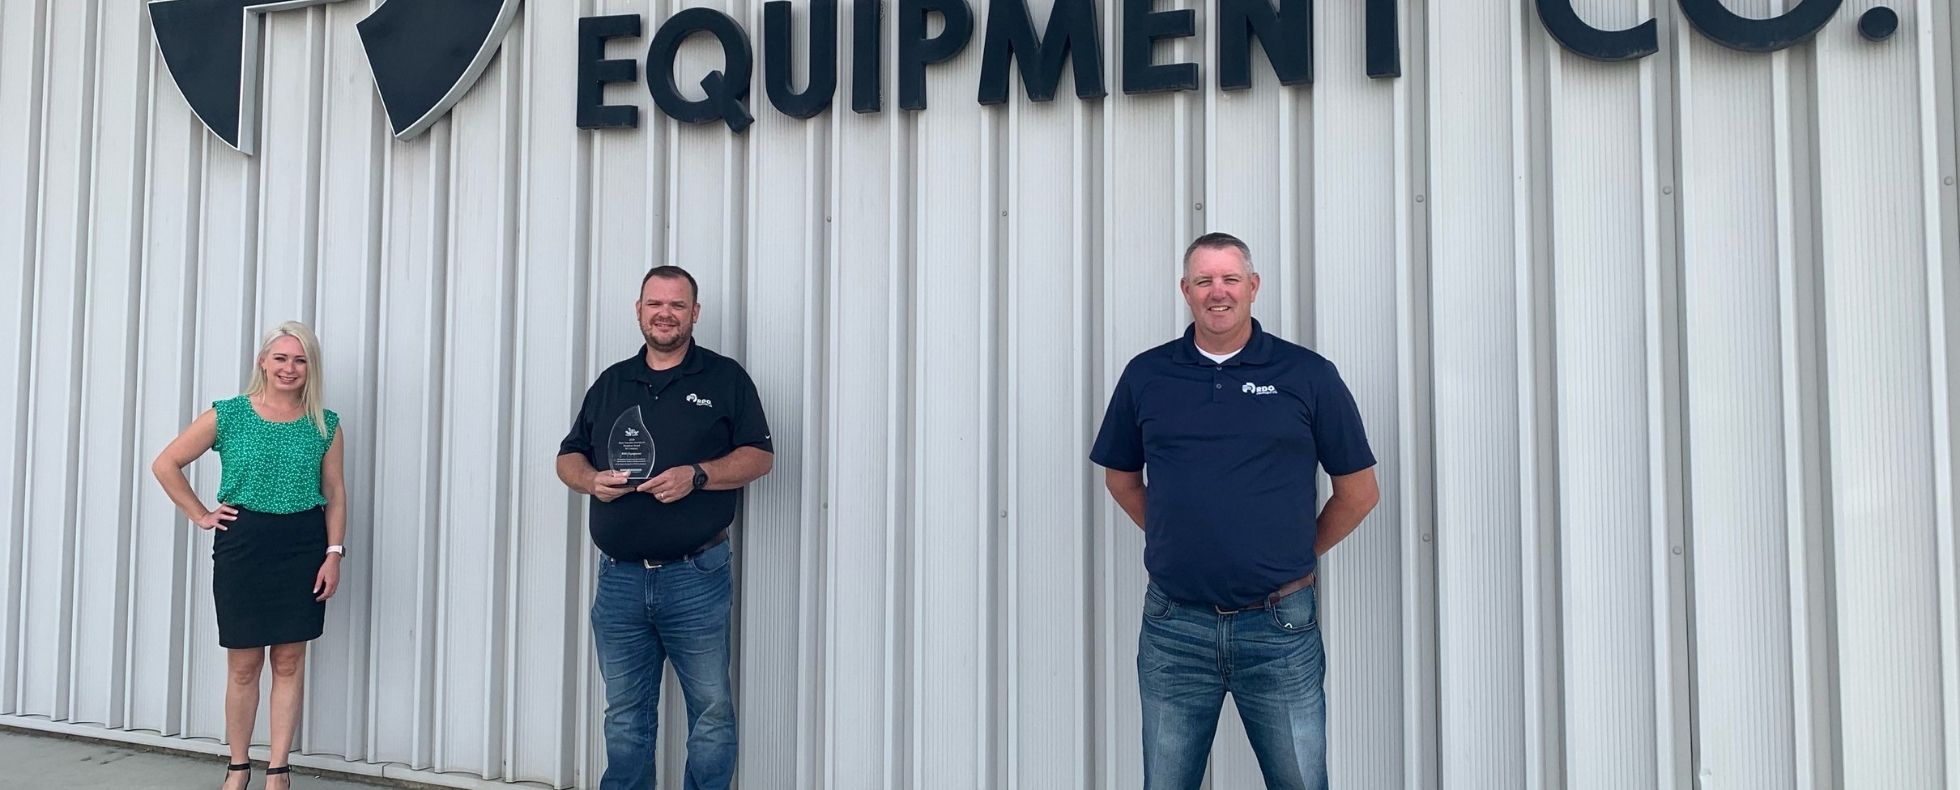 RDO Equipment Co. Northwest Ag Stores Awarded Most Valuable COVID-19 Company Response